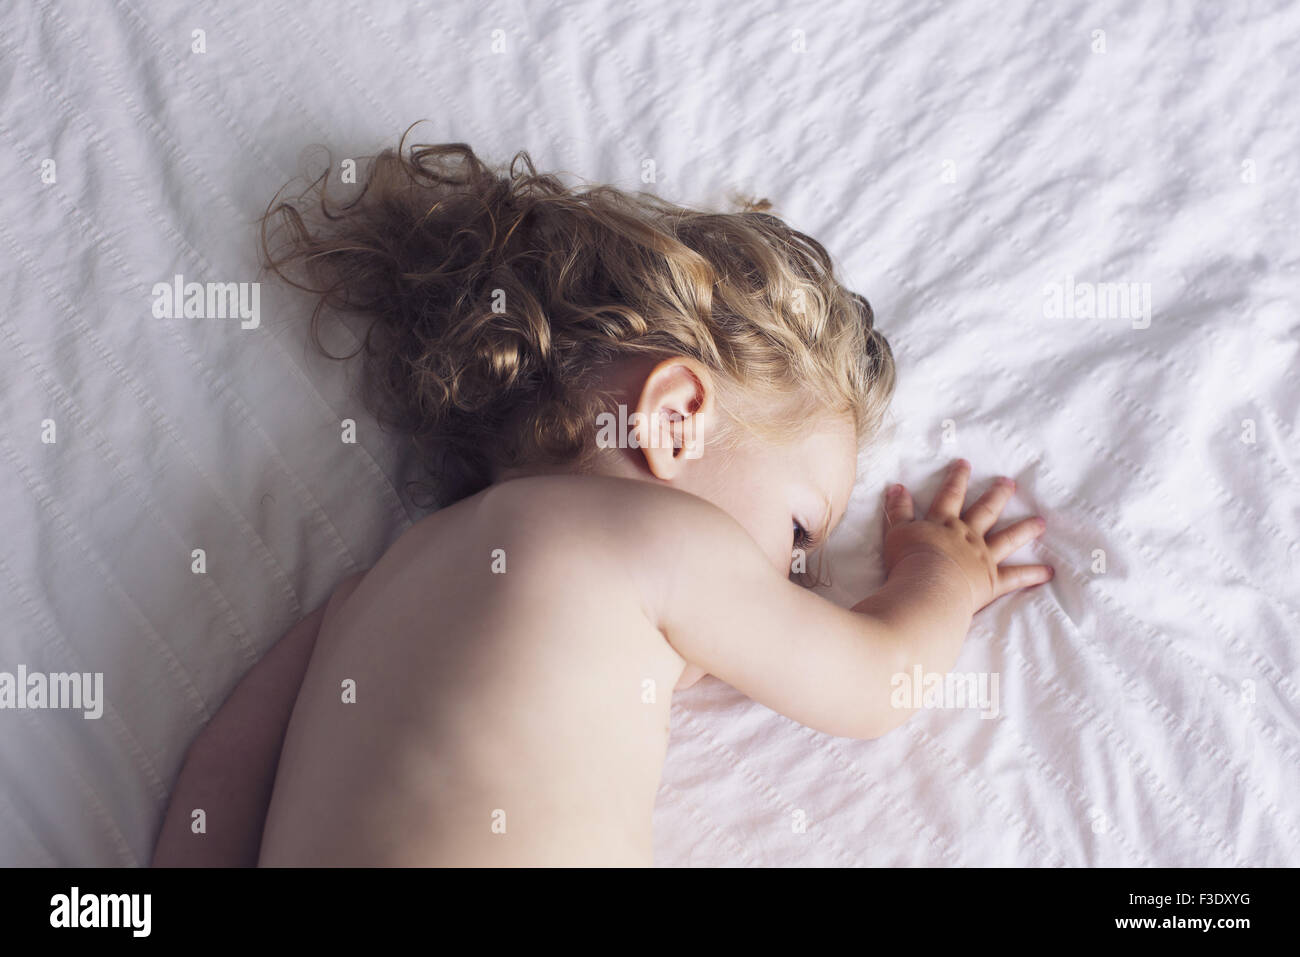 Baby girl napping on bed Stock Photo